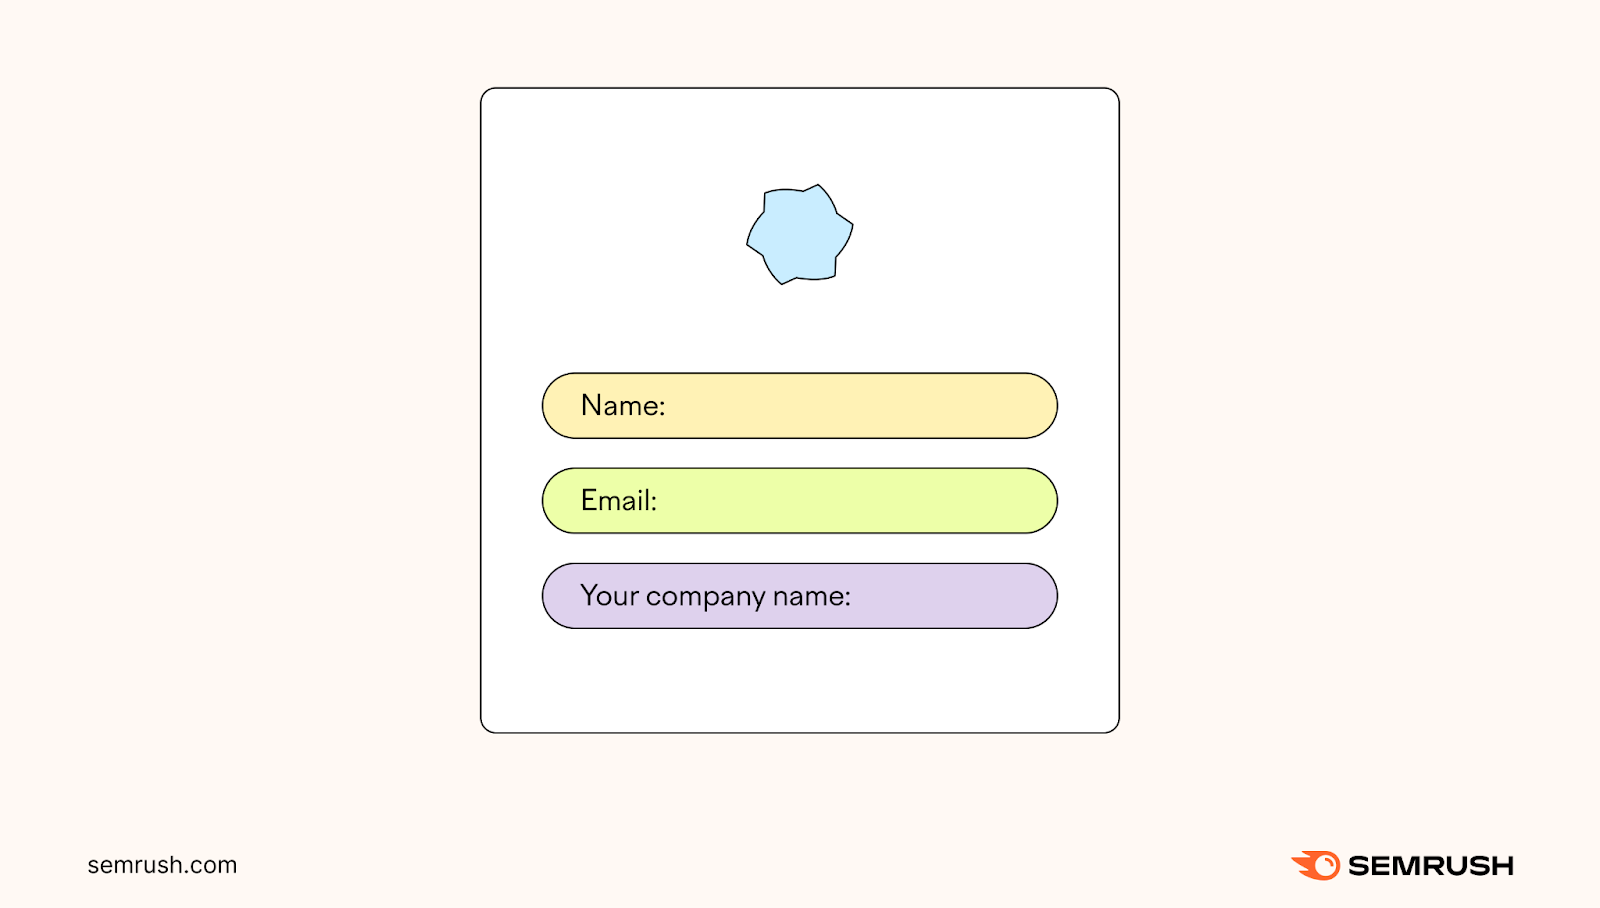 A simple opt-in form that includes "Name," "Email," and "Your company name" fields